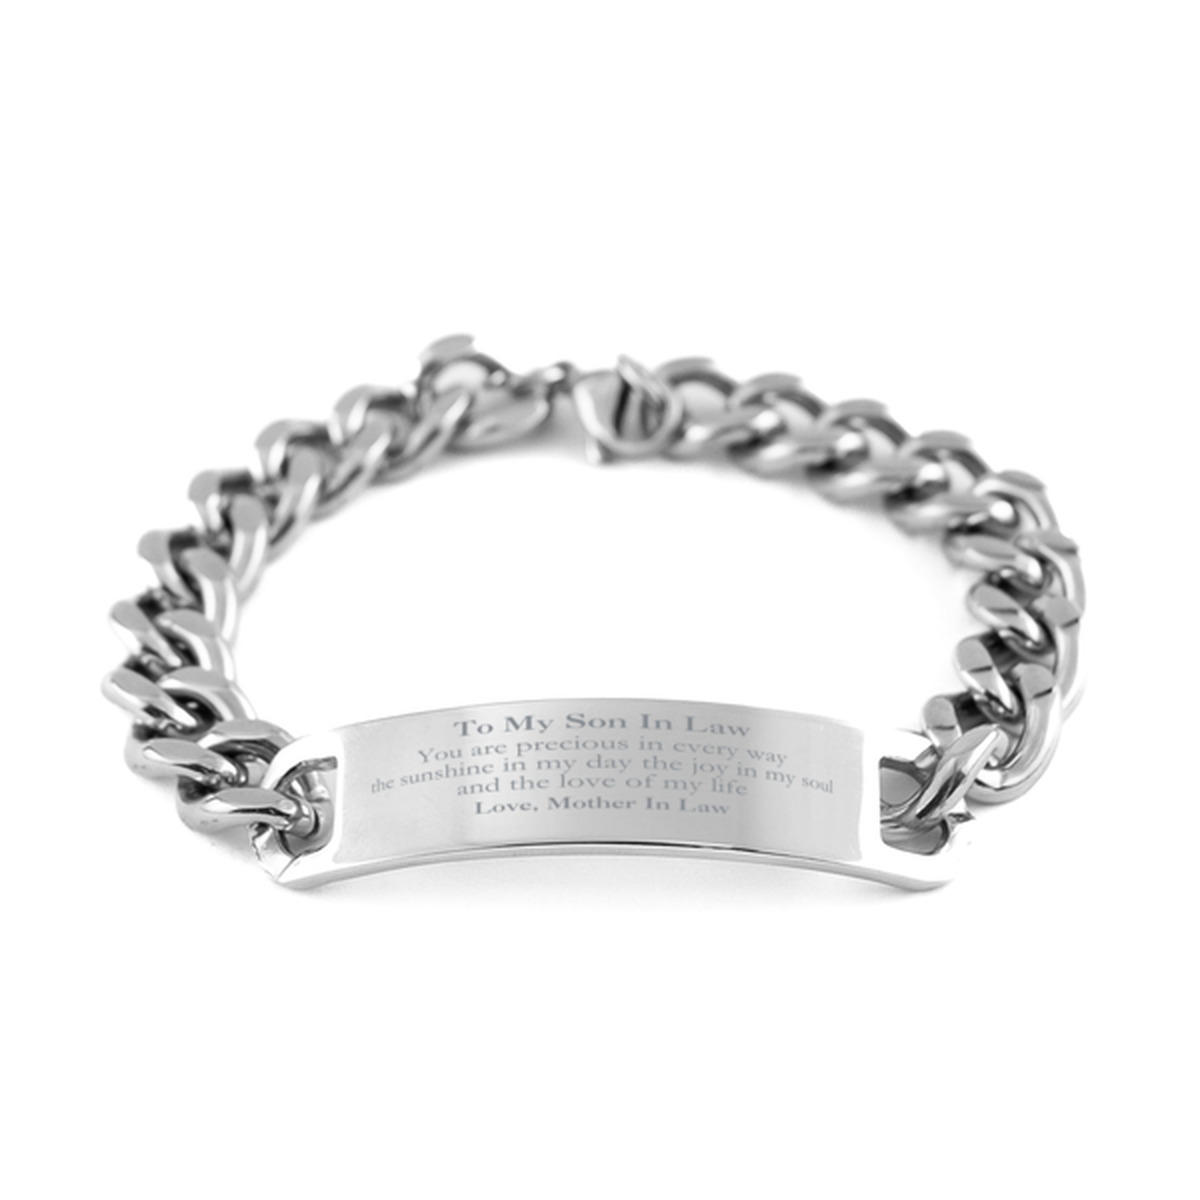 Graduation Gifts for Son In Law Cuban Chain Stainless Steel Bracelet Present from Mother In Law, Christmas Son In Law Birthday Gifts Son In Law You are precious in every way the sunshine in my day. Love, Mother In Law